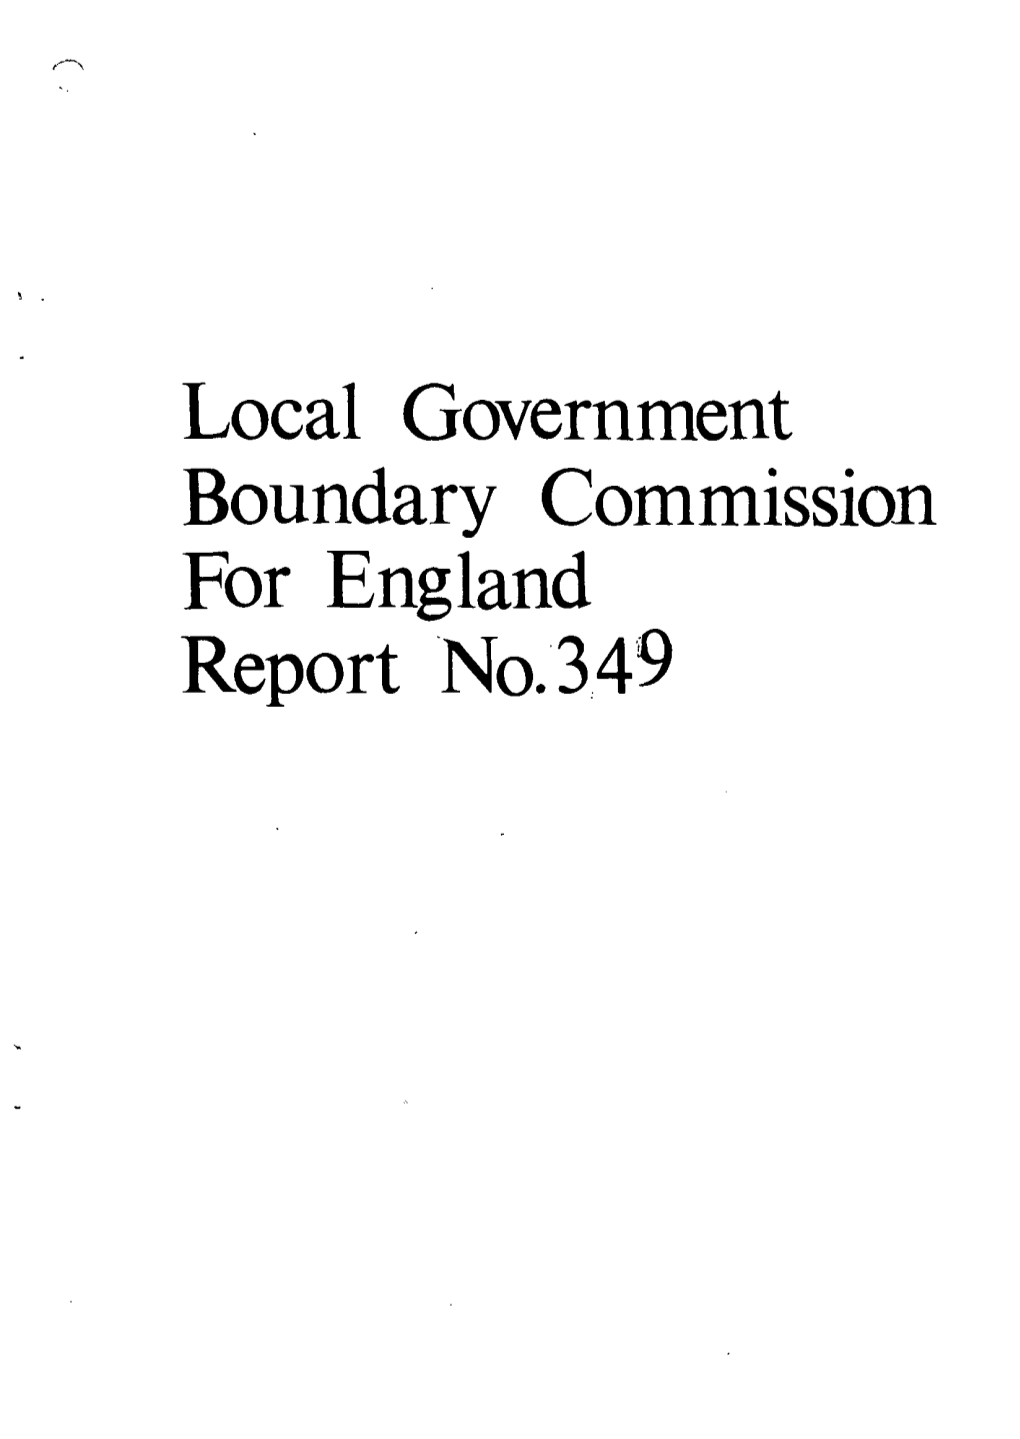 Local Government Boundary Commission for England Report No.349 O LOCAL GOVERNMENT' BOUND.'-RY COMMISSION for £.:Glaild